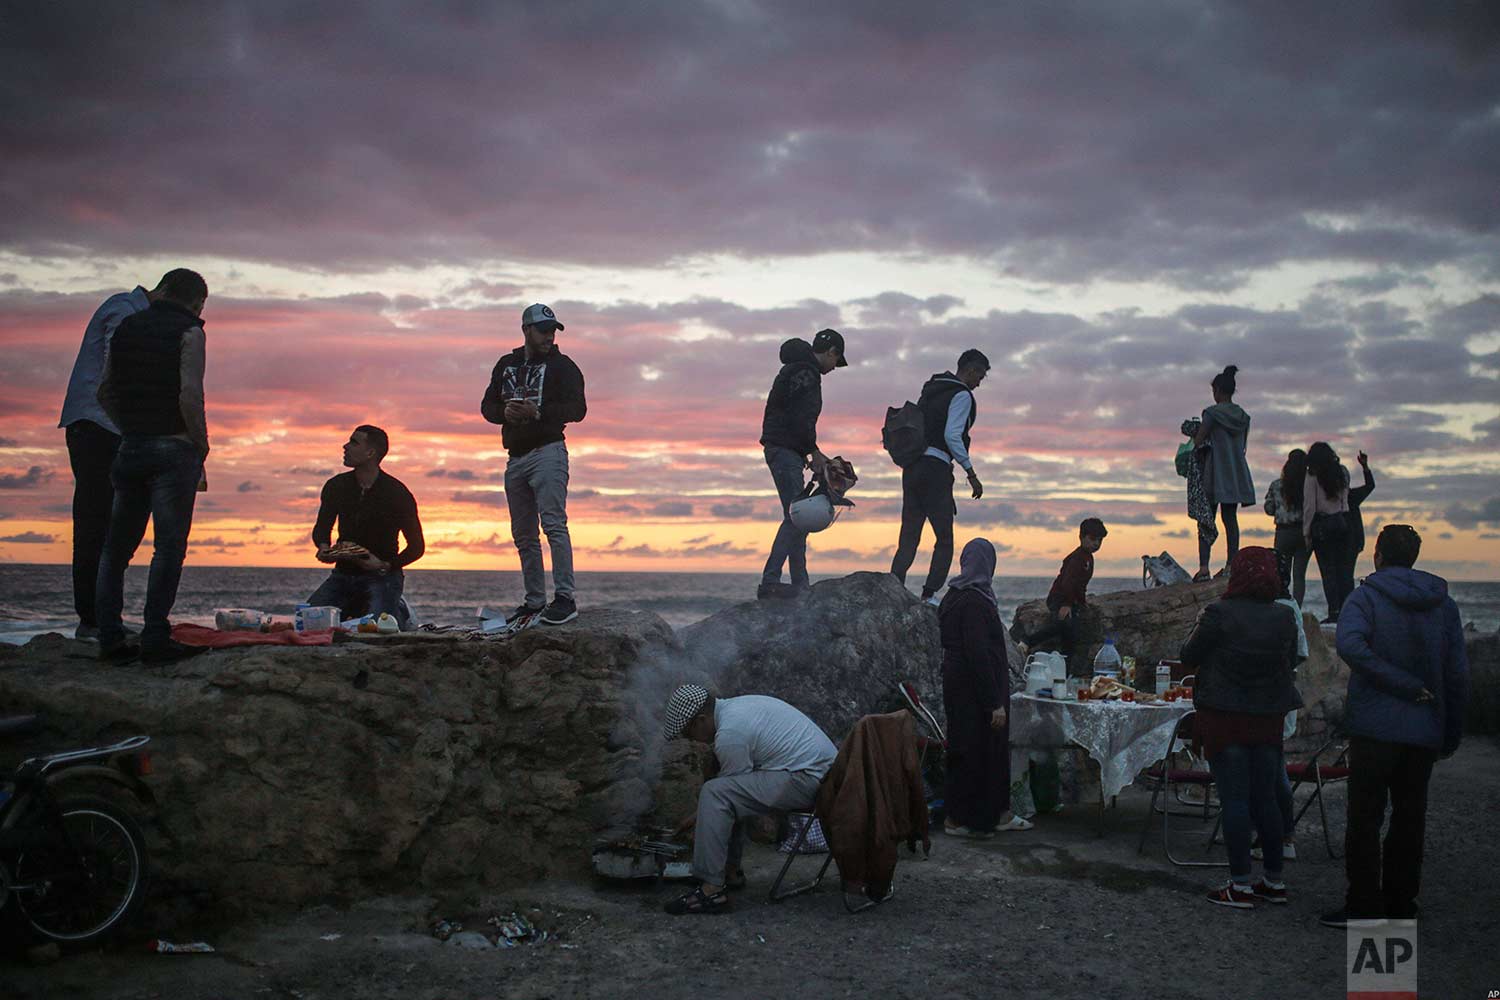  Beachgoers observe the sunset as a man grills meat for his family to break their fast in the holy month of Ramadan, Rabat, Morocco, Saturday, June 9, 2018. (AP Photo/Mosa'ab Elshamy) 